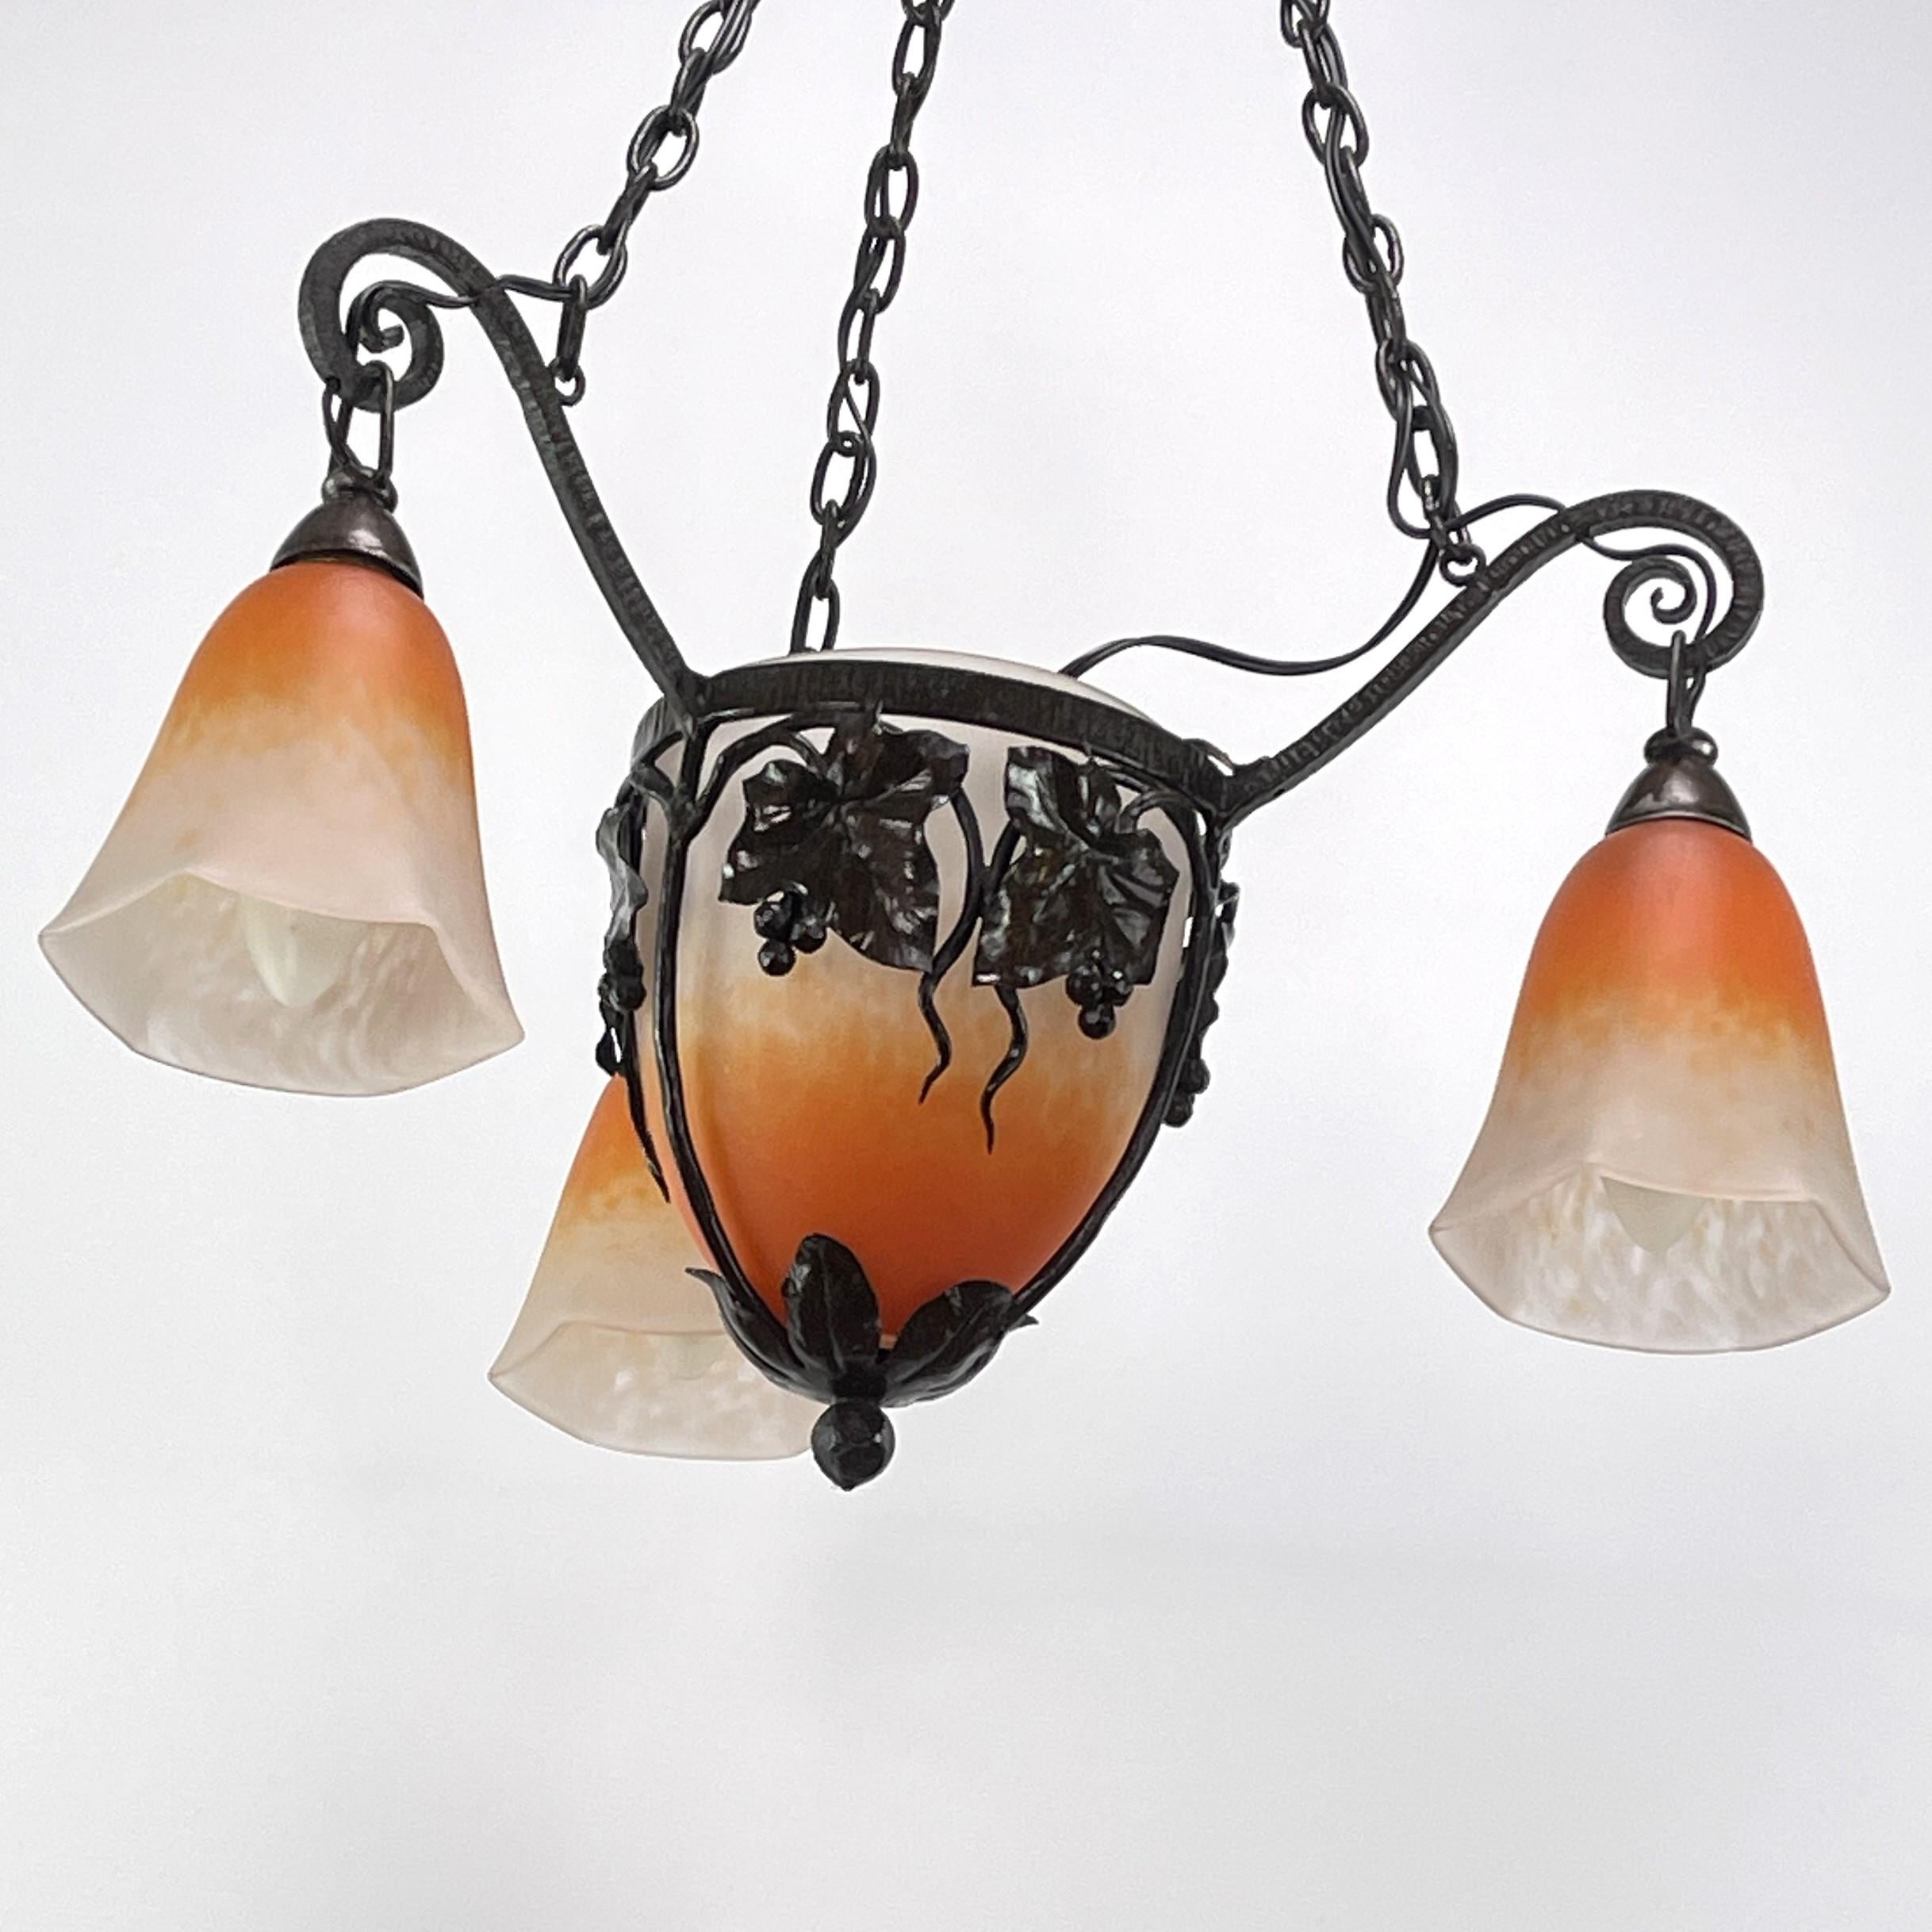 French Art Deco Pate De Verre Ceiling Lamp by Schneider, 1930s For Sale